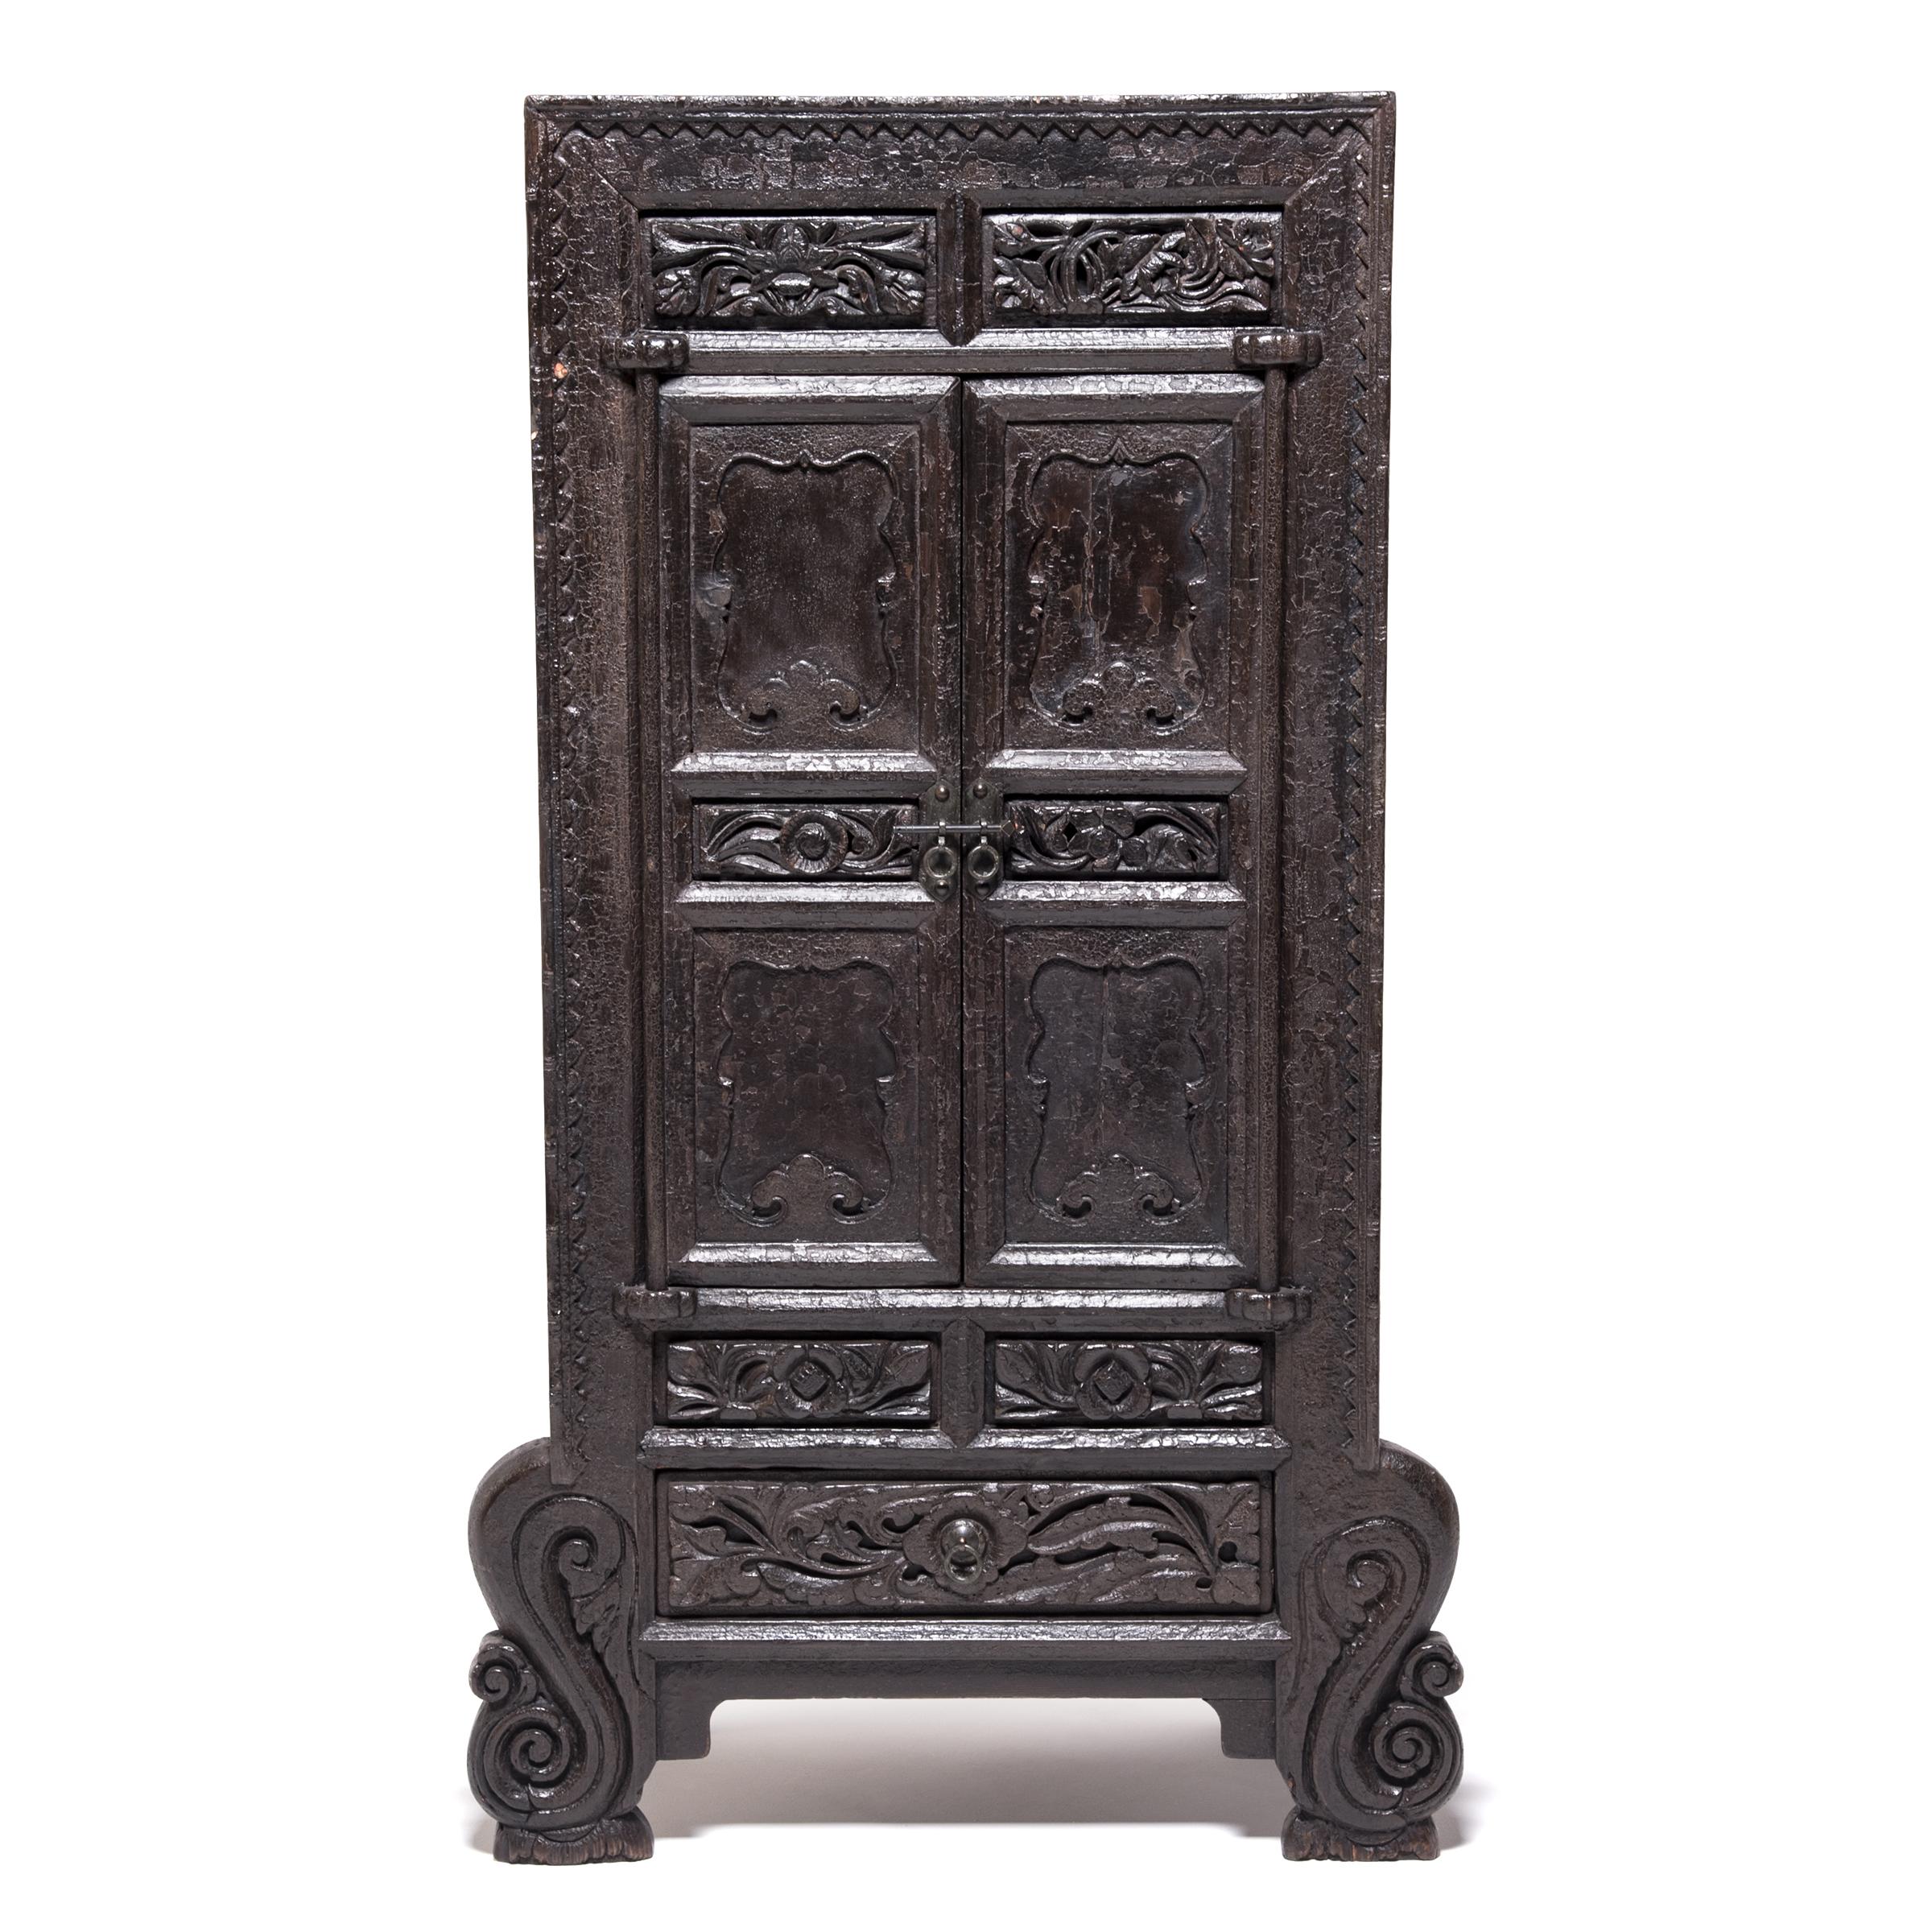 These richly carved and lacquered cabinets were made over 150 year ago in China’s Shanxi Province and remain in remarkable condition. The cabinet fronts are well-proportioned and carved with imaginative detail, including a scalloped trim, swirling